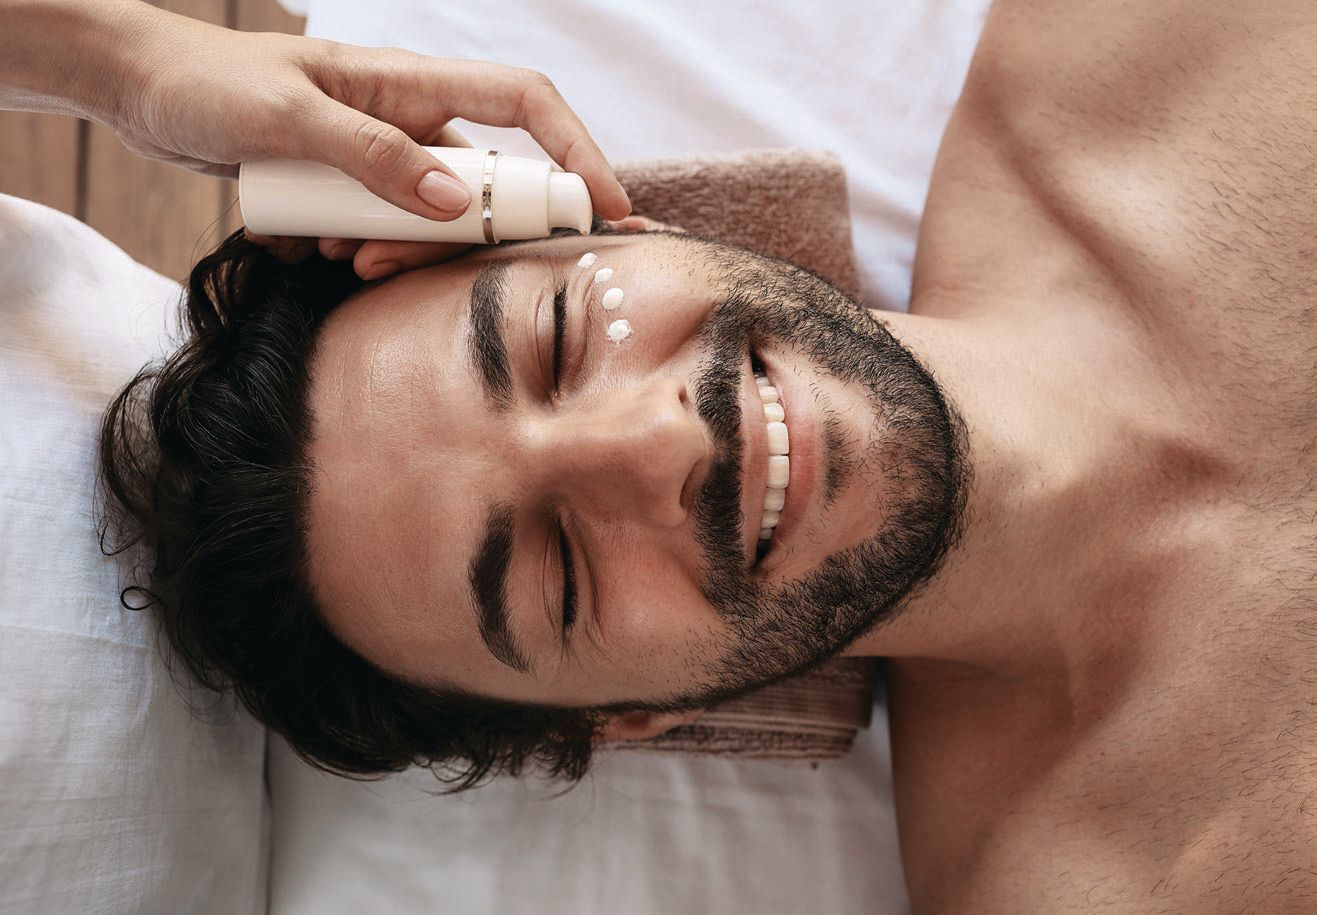 Main Line men are taking their grooming and wellness services seriously thanks to tailored treatments PHOTO FROM ISTOCK AND COURTESY OF BLOOM FACIAL PLASTIC SURGERY